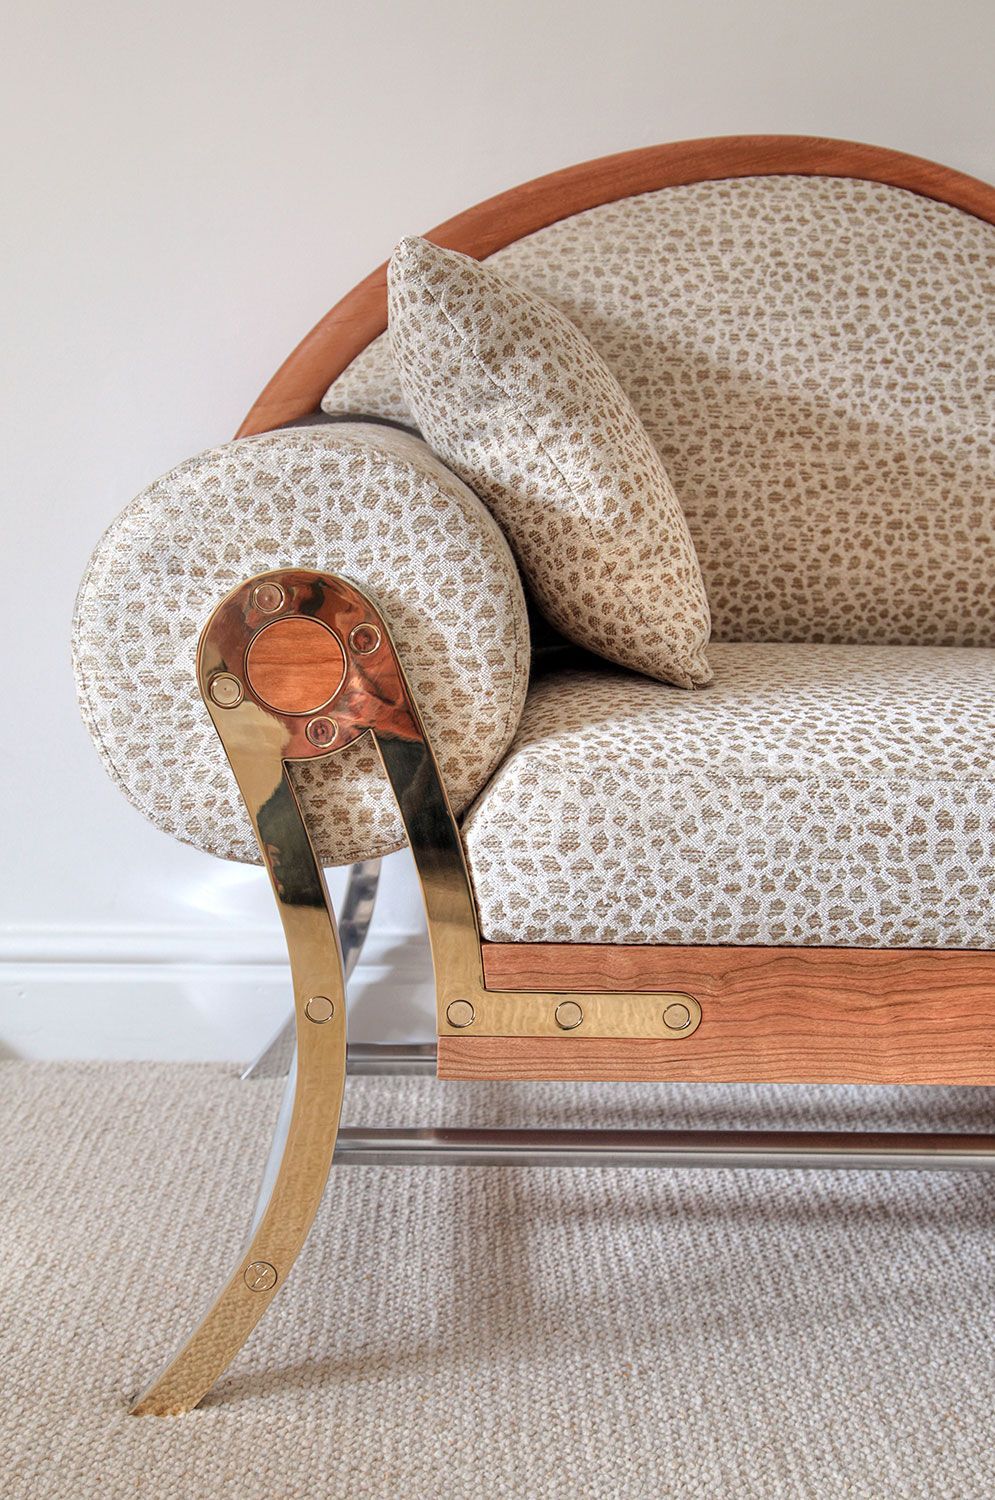 A close up of a designer couch with a leopard print fabric and a brass arm.